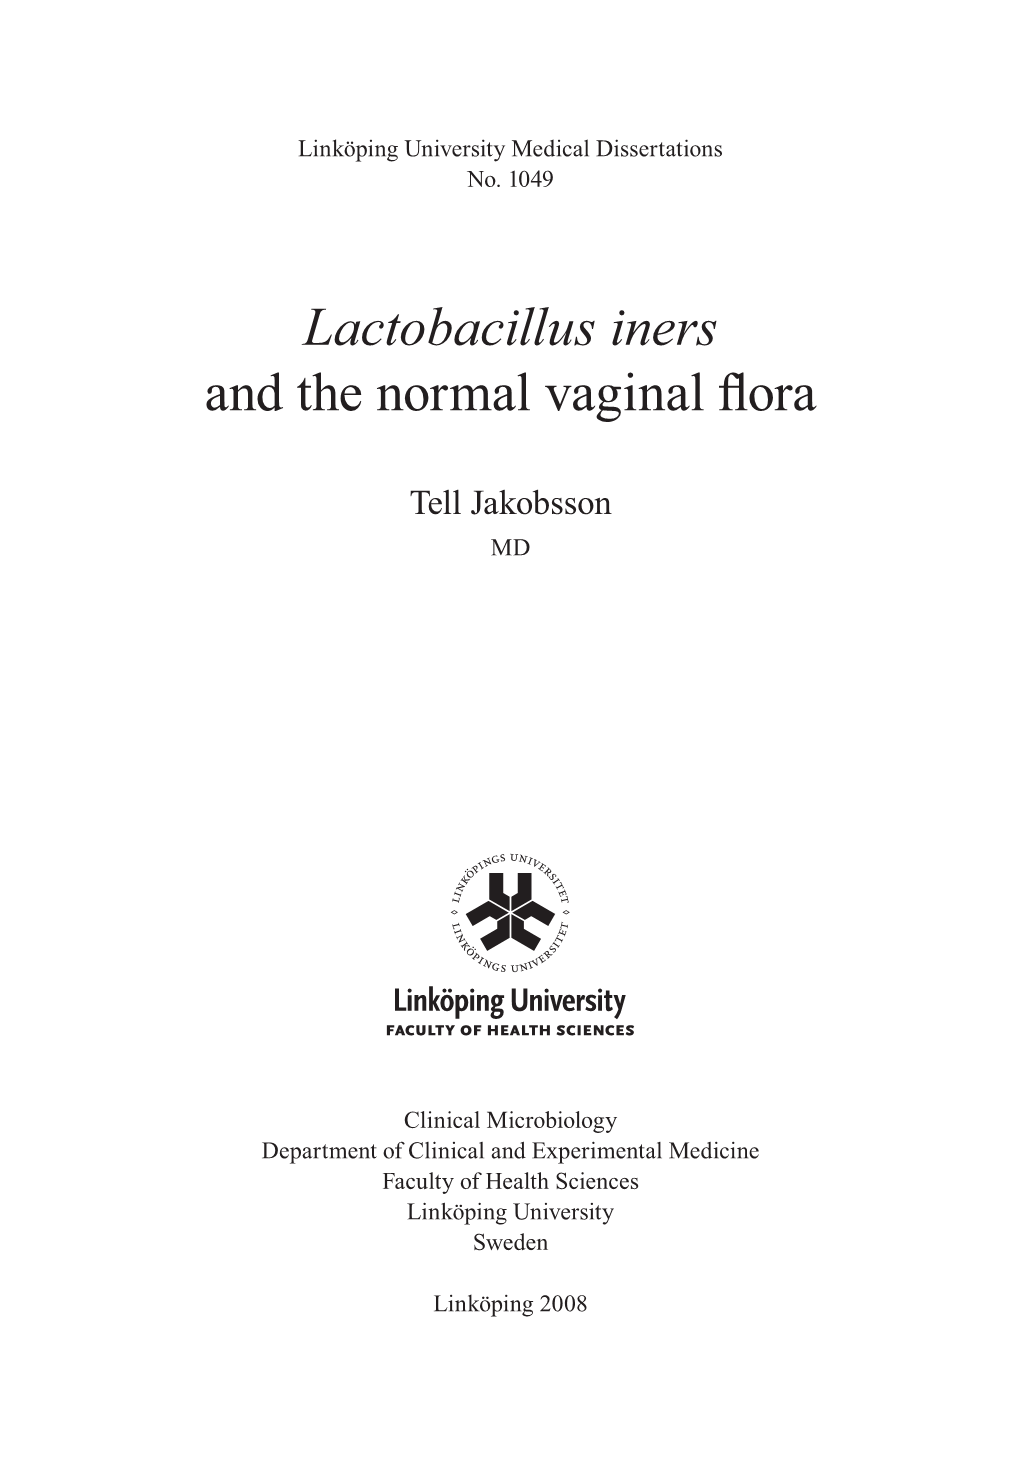 Lactobacillus Iners and the Normal Vaginal Flora